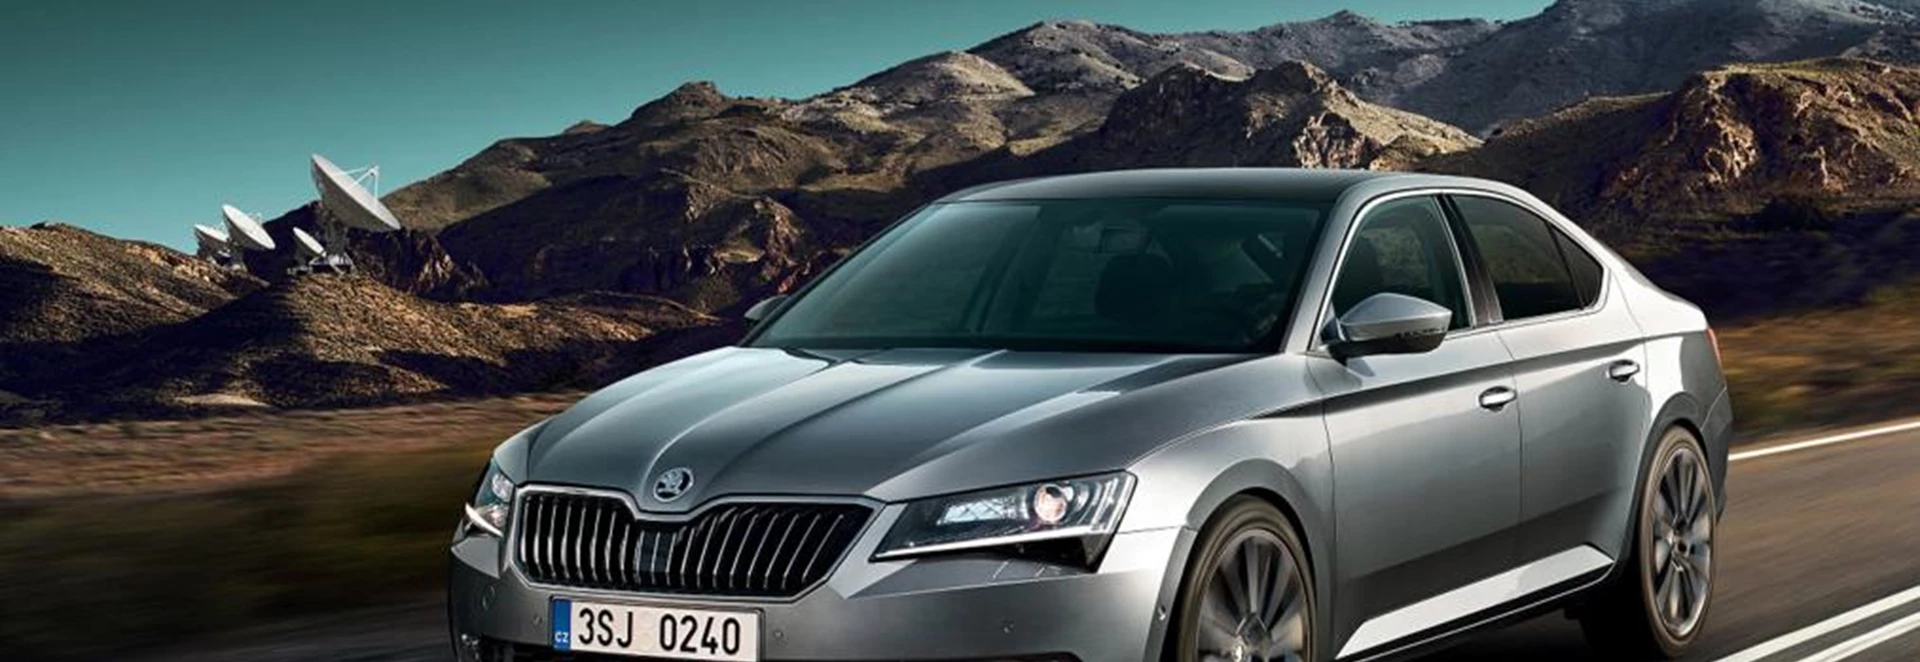 Skoda Superb freshened up with new and improved tech